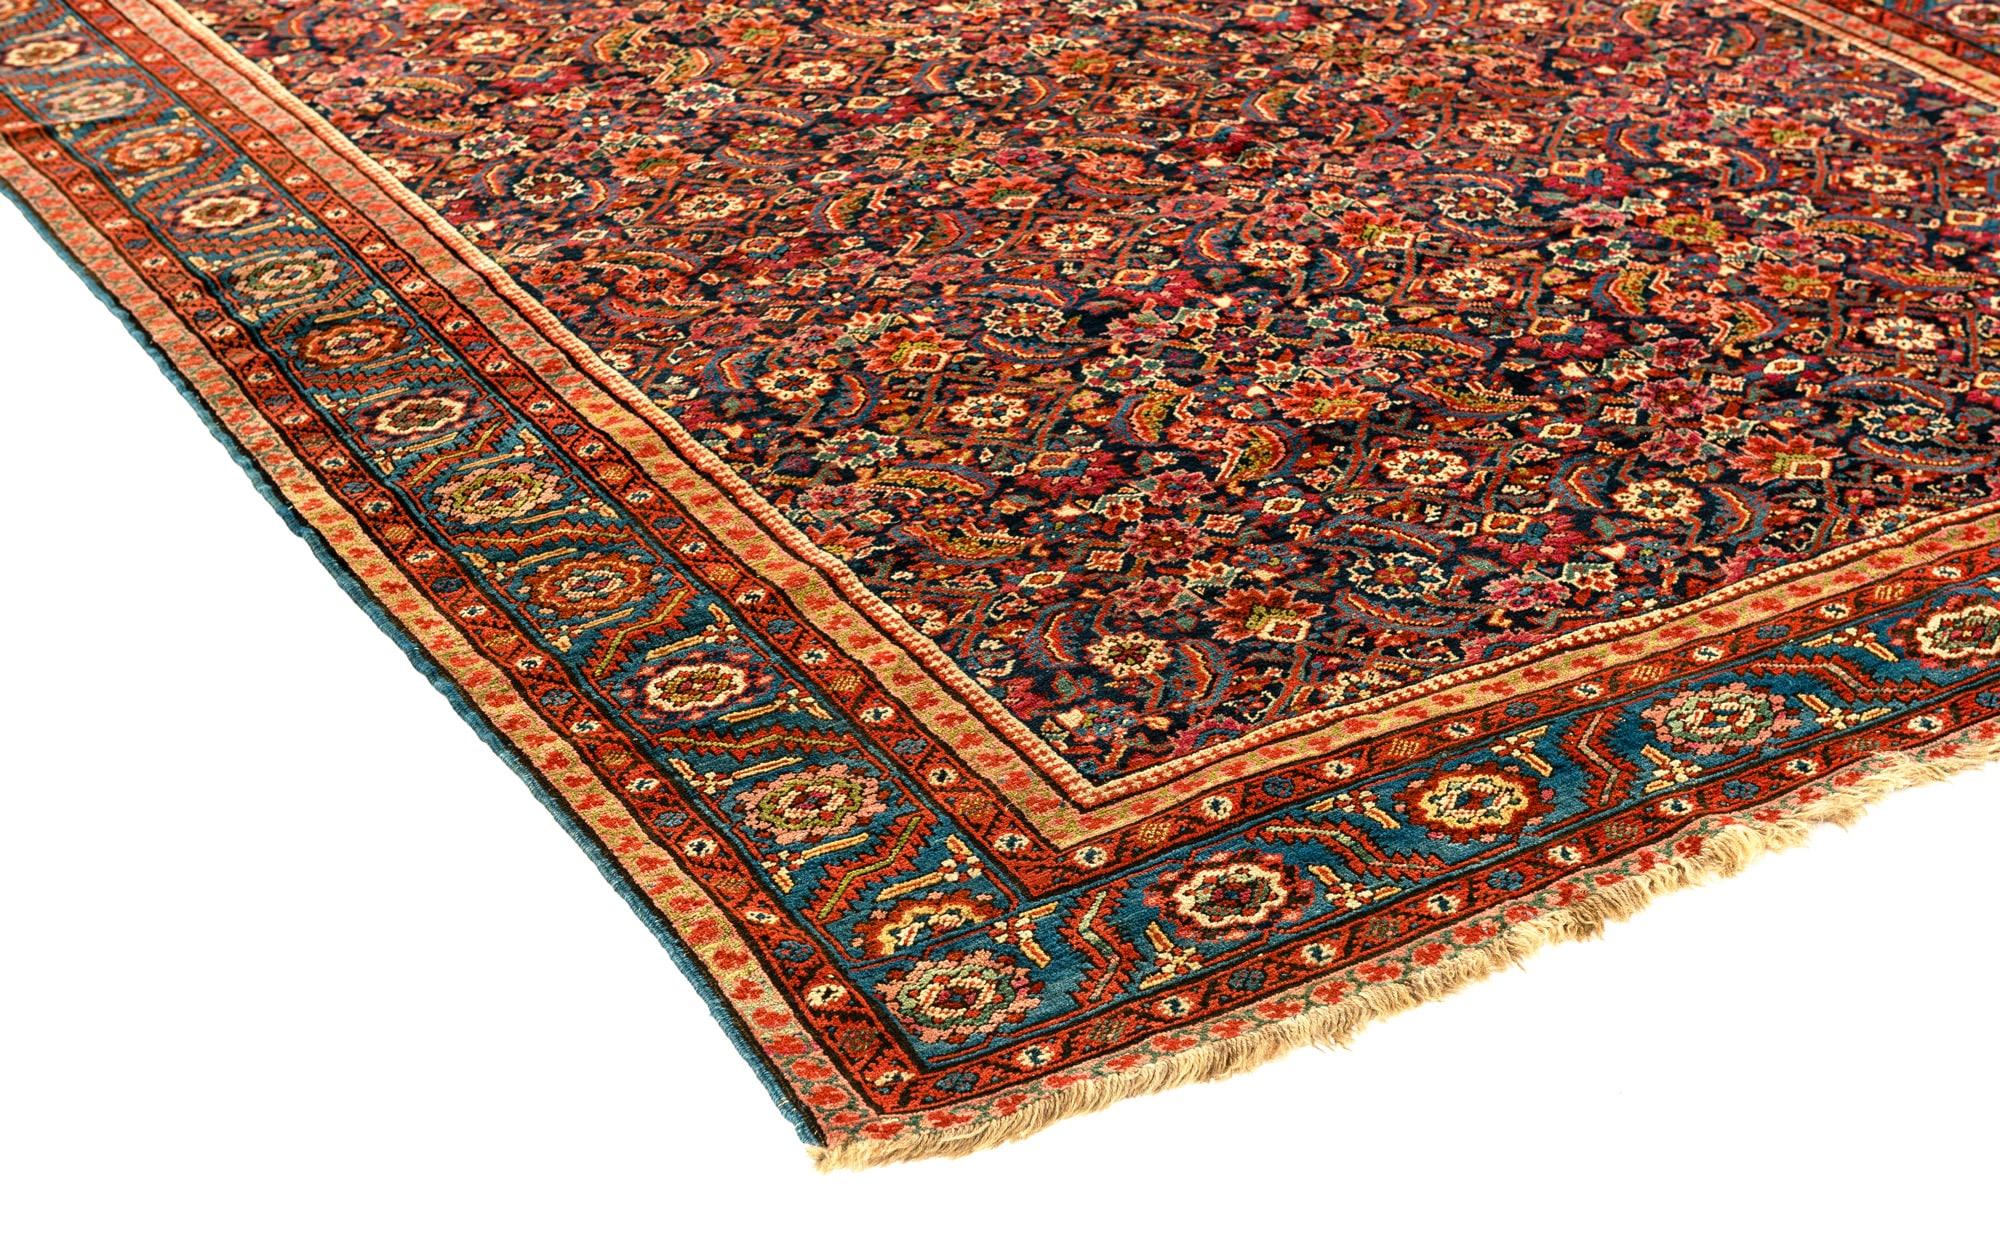 A beautifully executed mid-late 19th century gallery-sized carpet from the region of Heriz in Northwest Persia. The rugs woven in the village of Bakshaish were influenced by traditional motifs. The execution is outstanding considering the piece is